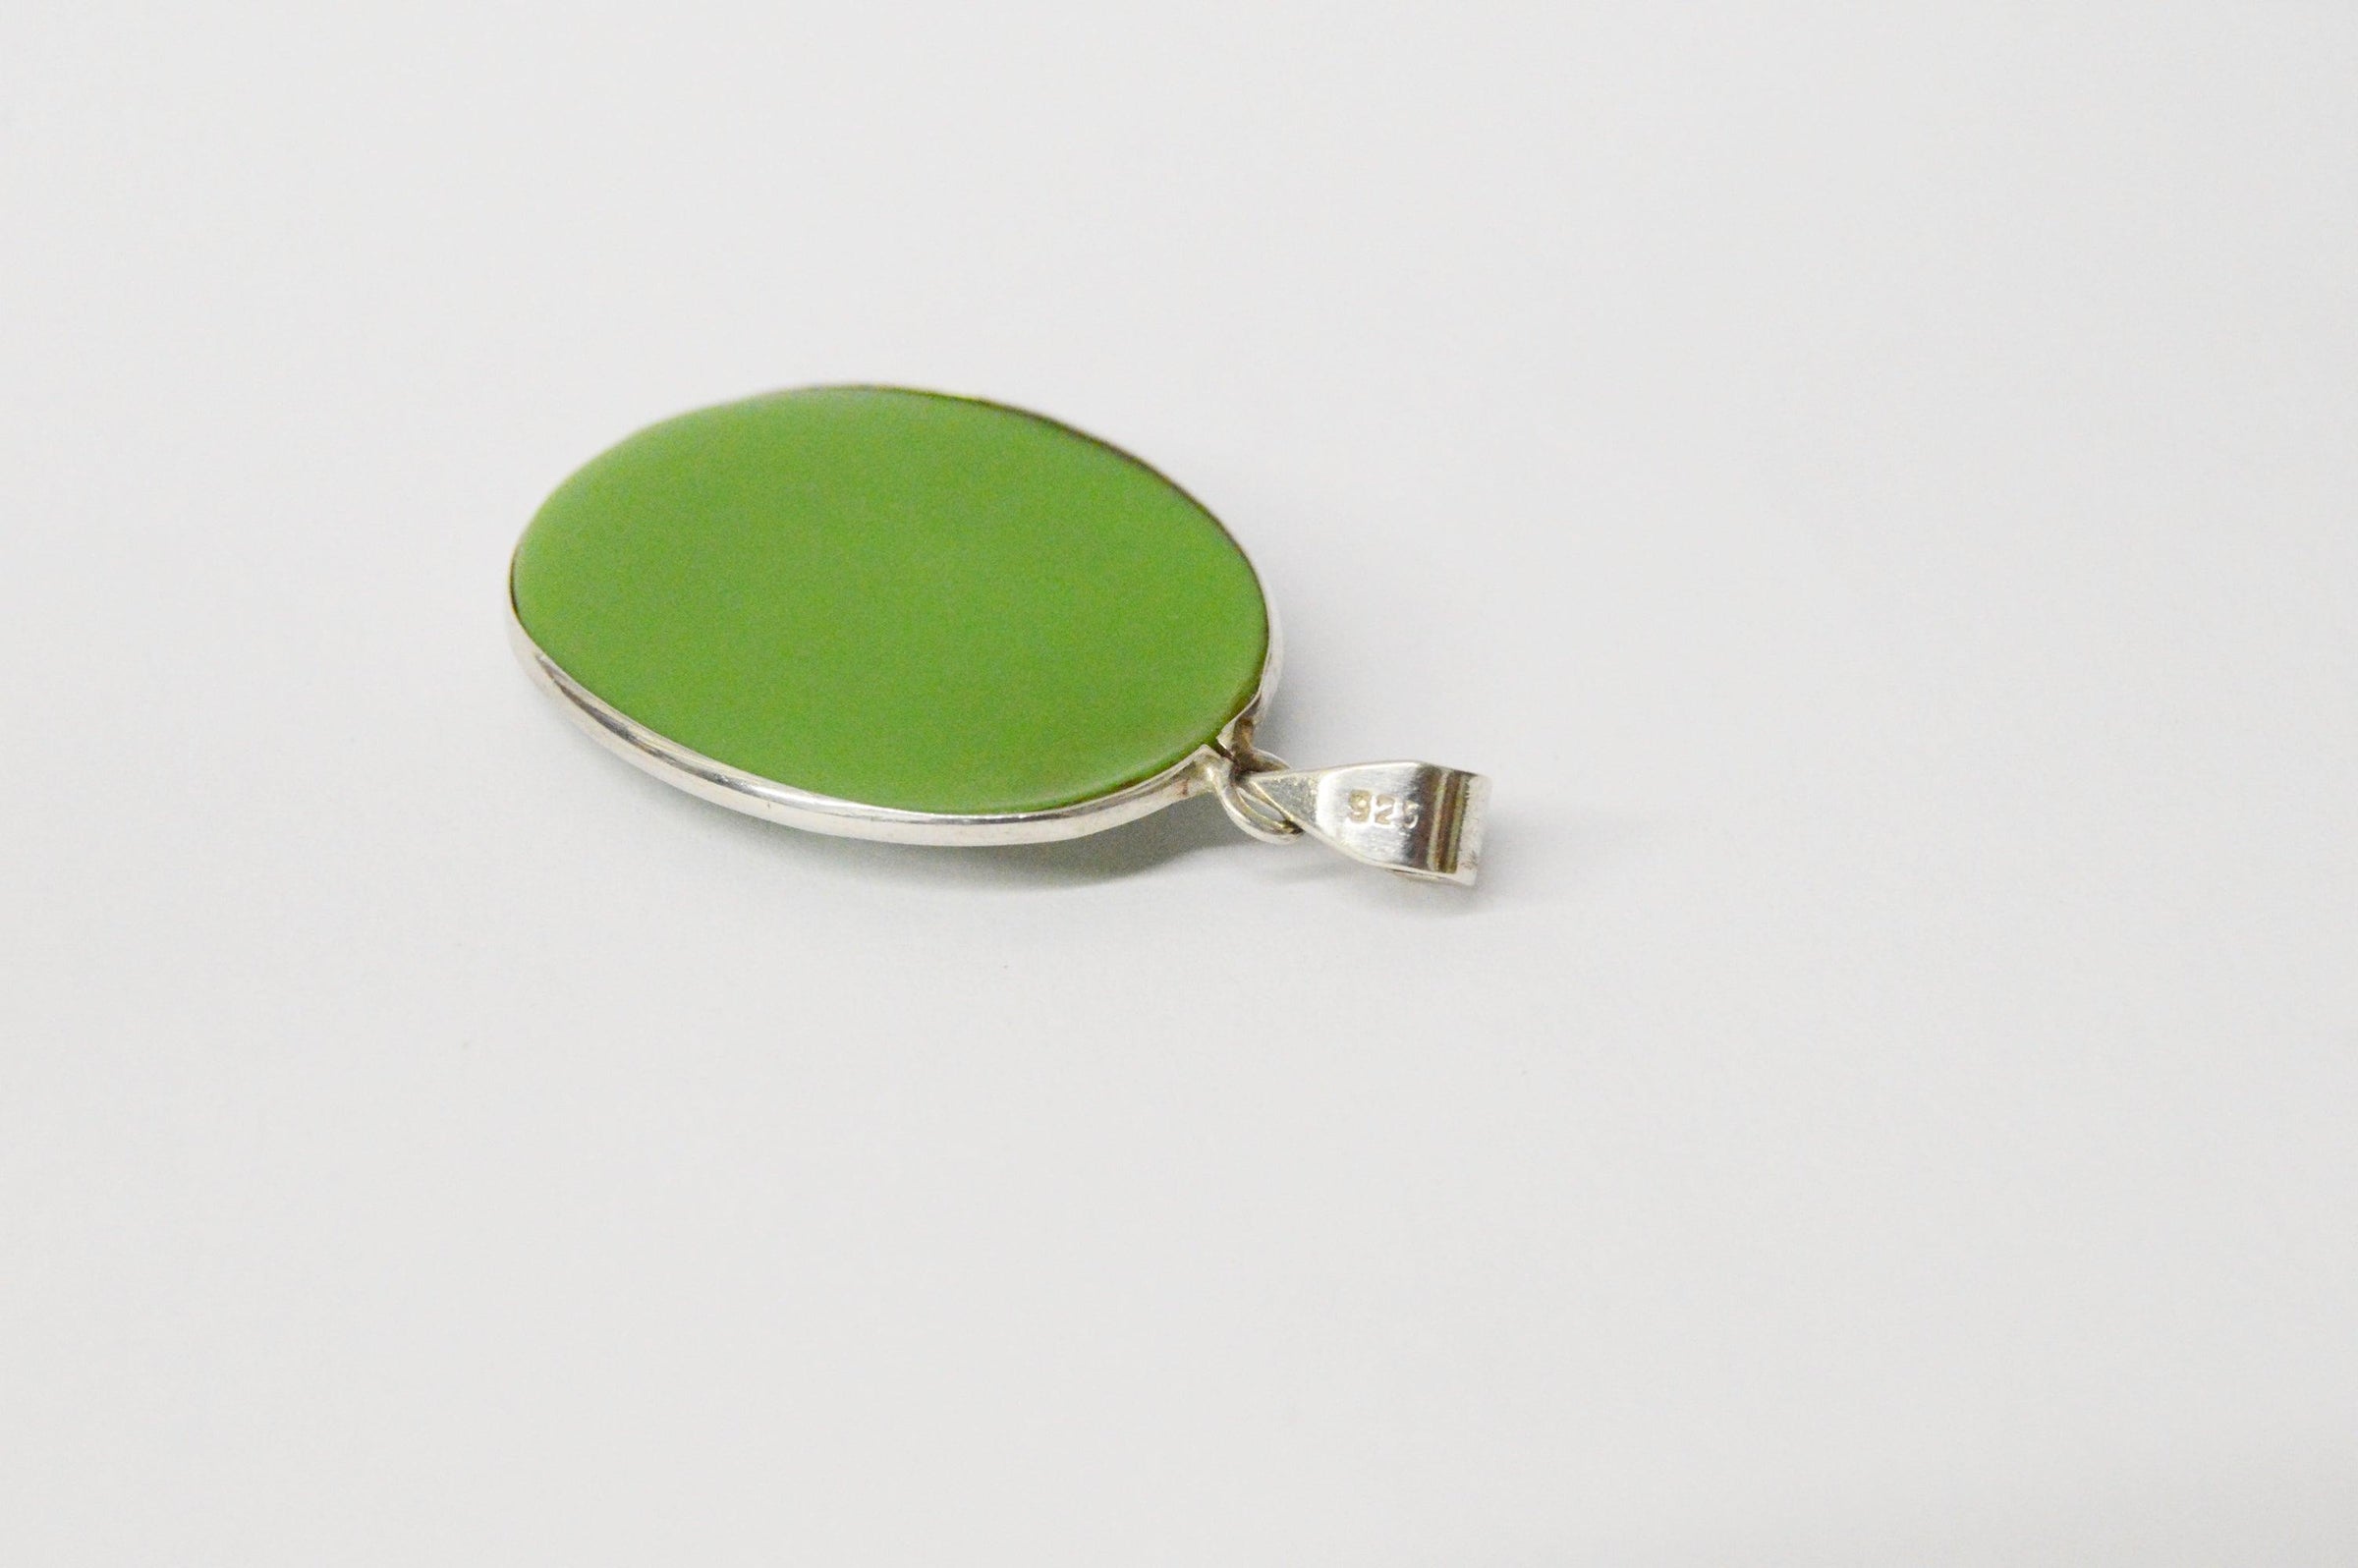 Sterling Silver .925 Green Cameo Pendant - Hers and His Treasures